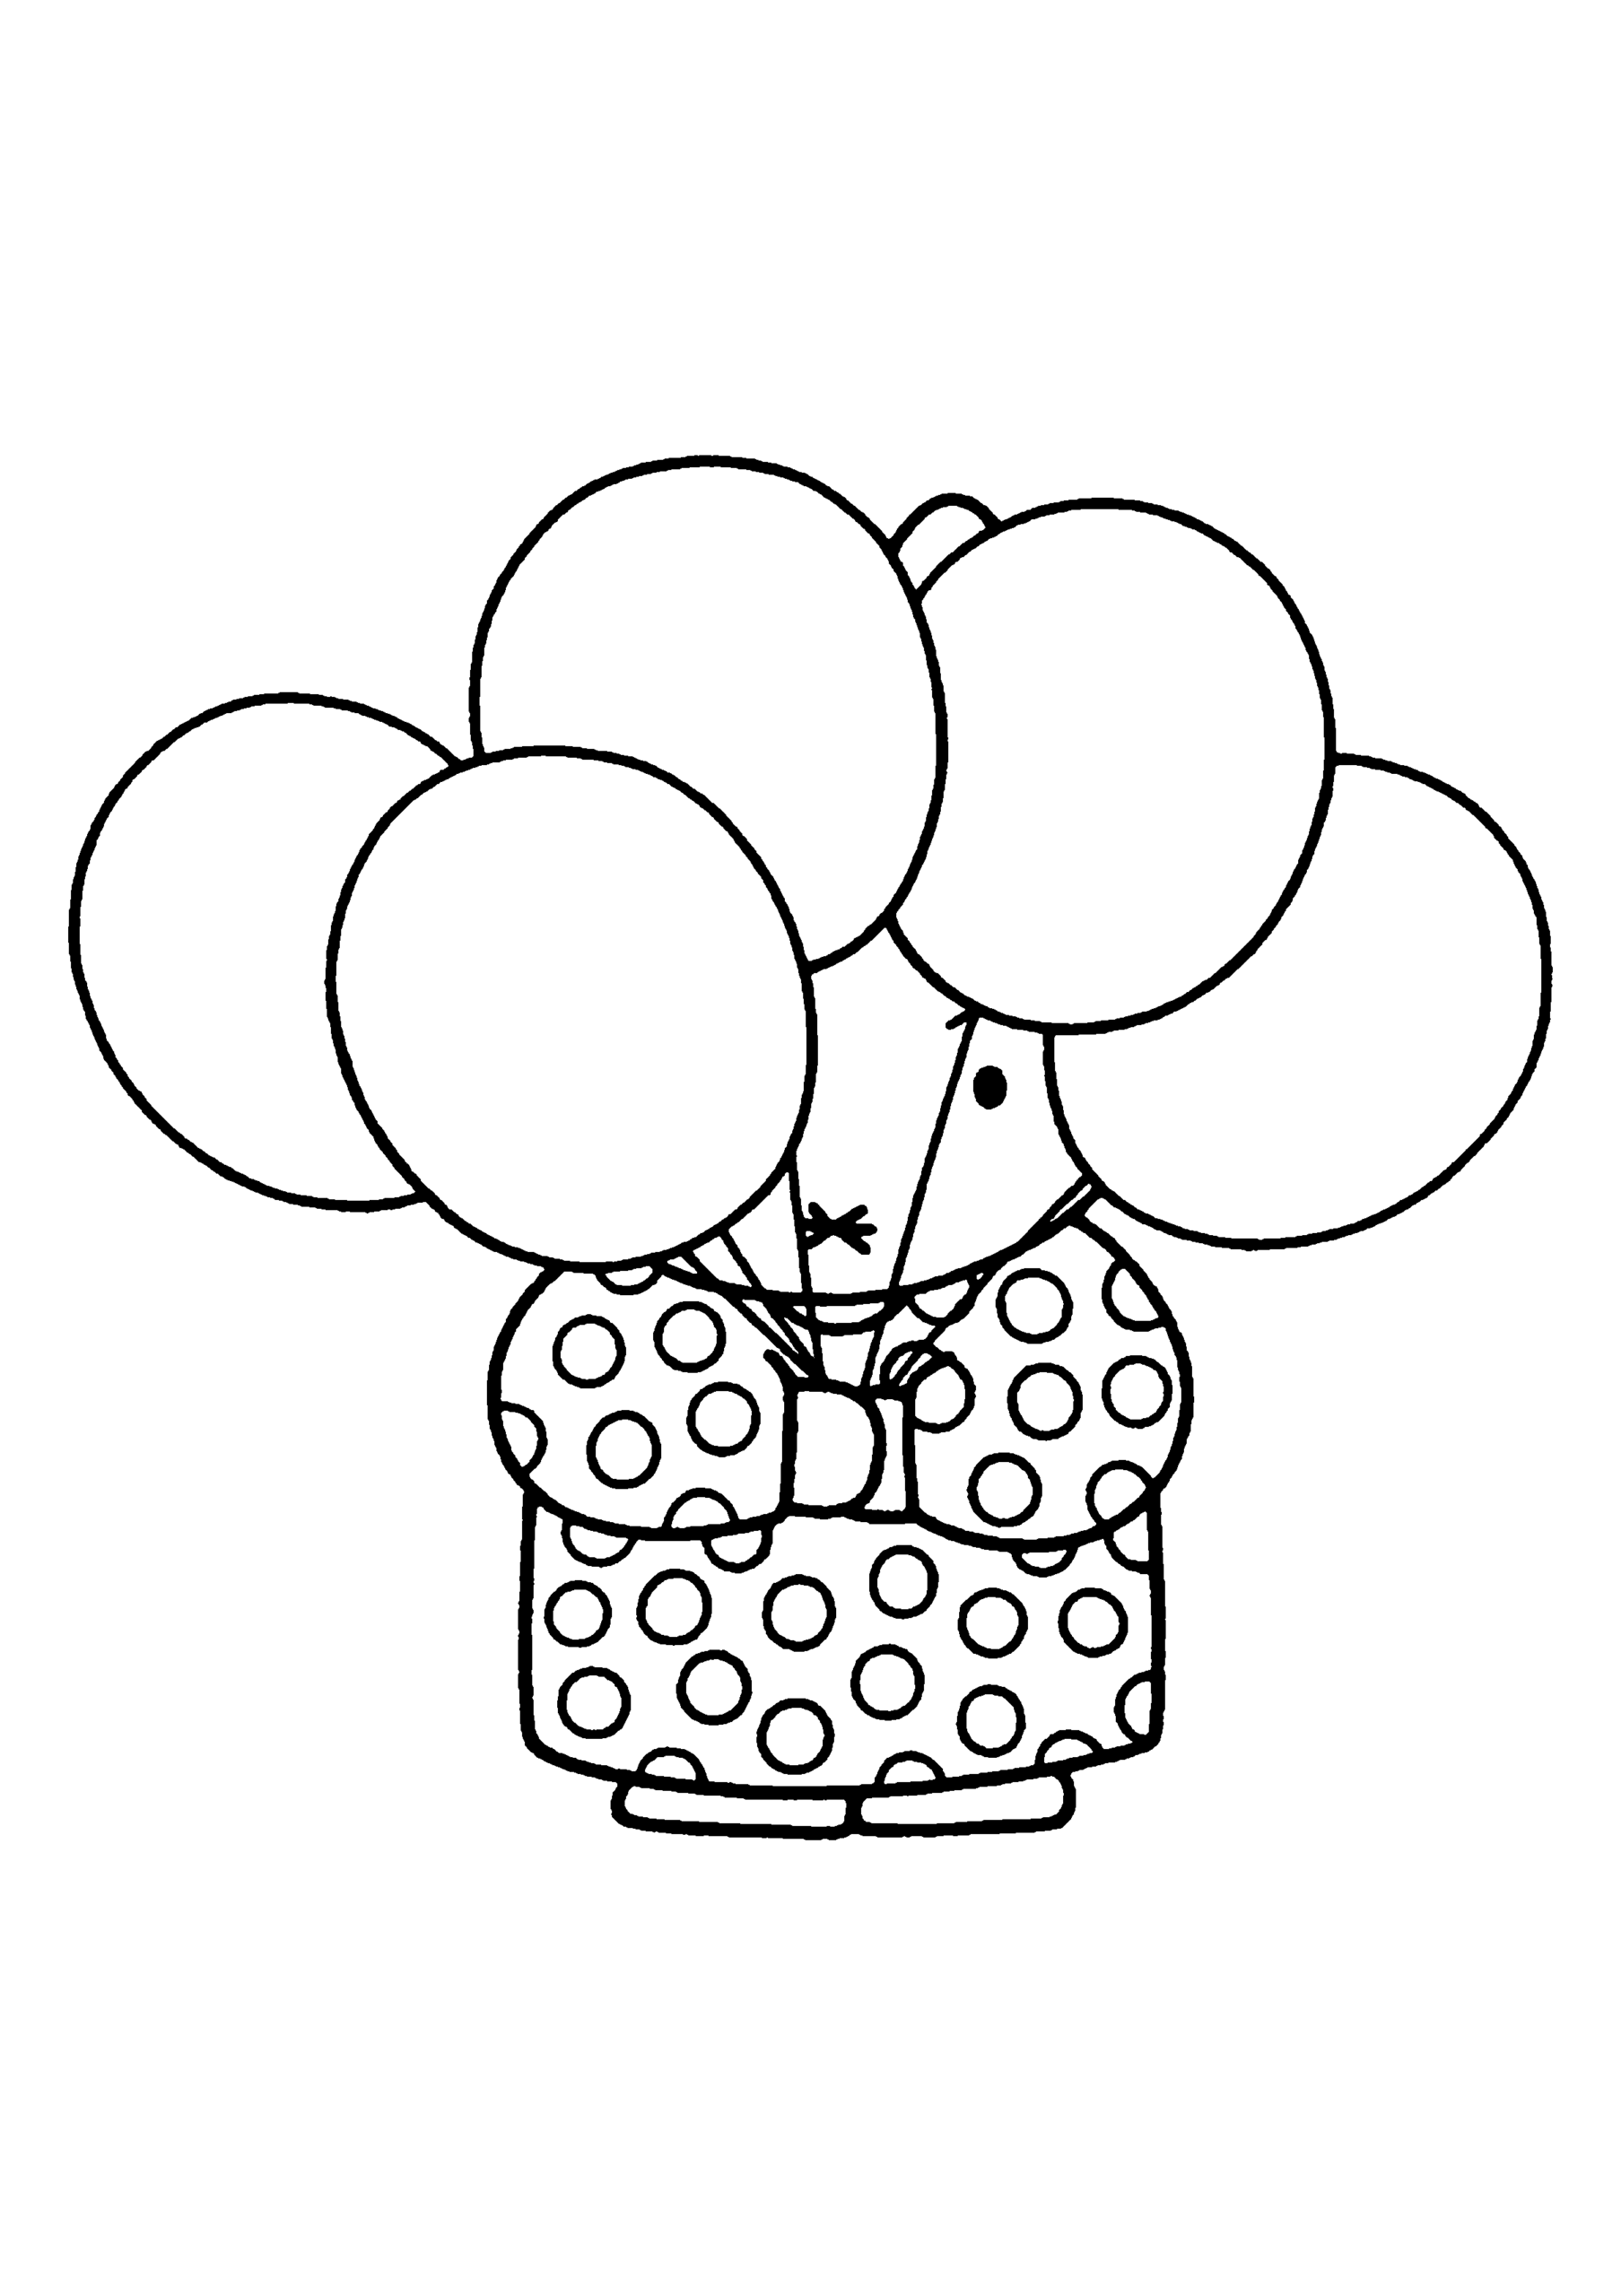 Miffy Coloring Pages Cartoons miffy 0 Printable 2020 4198 Coloring4free